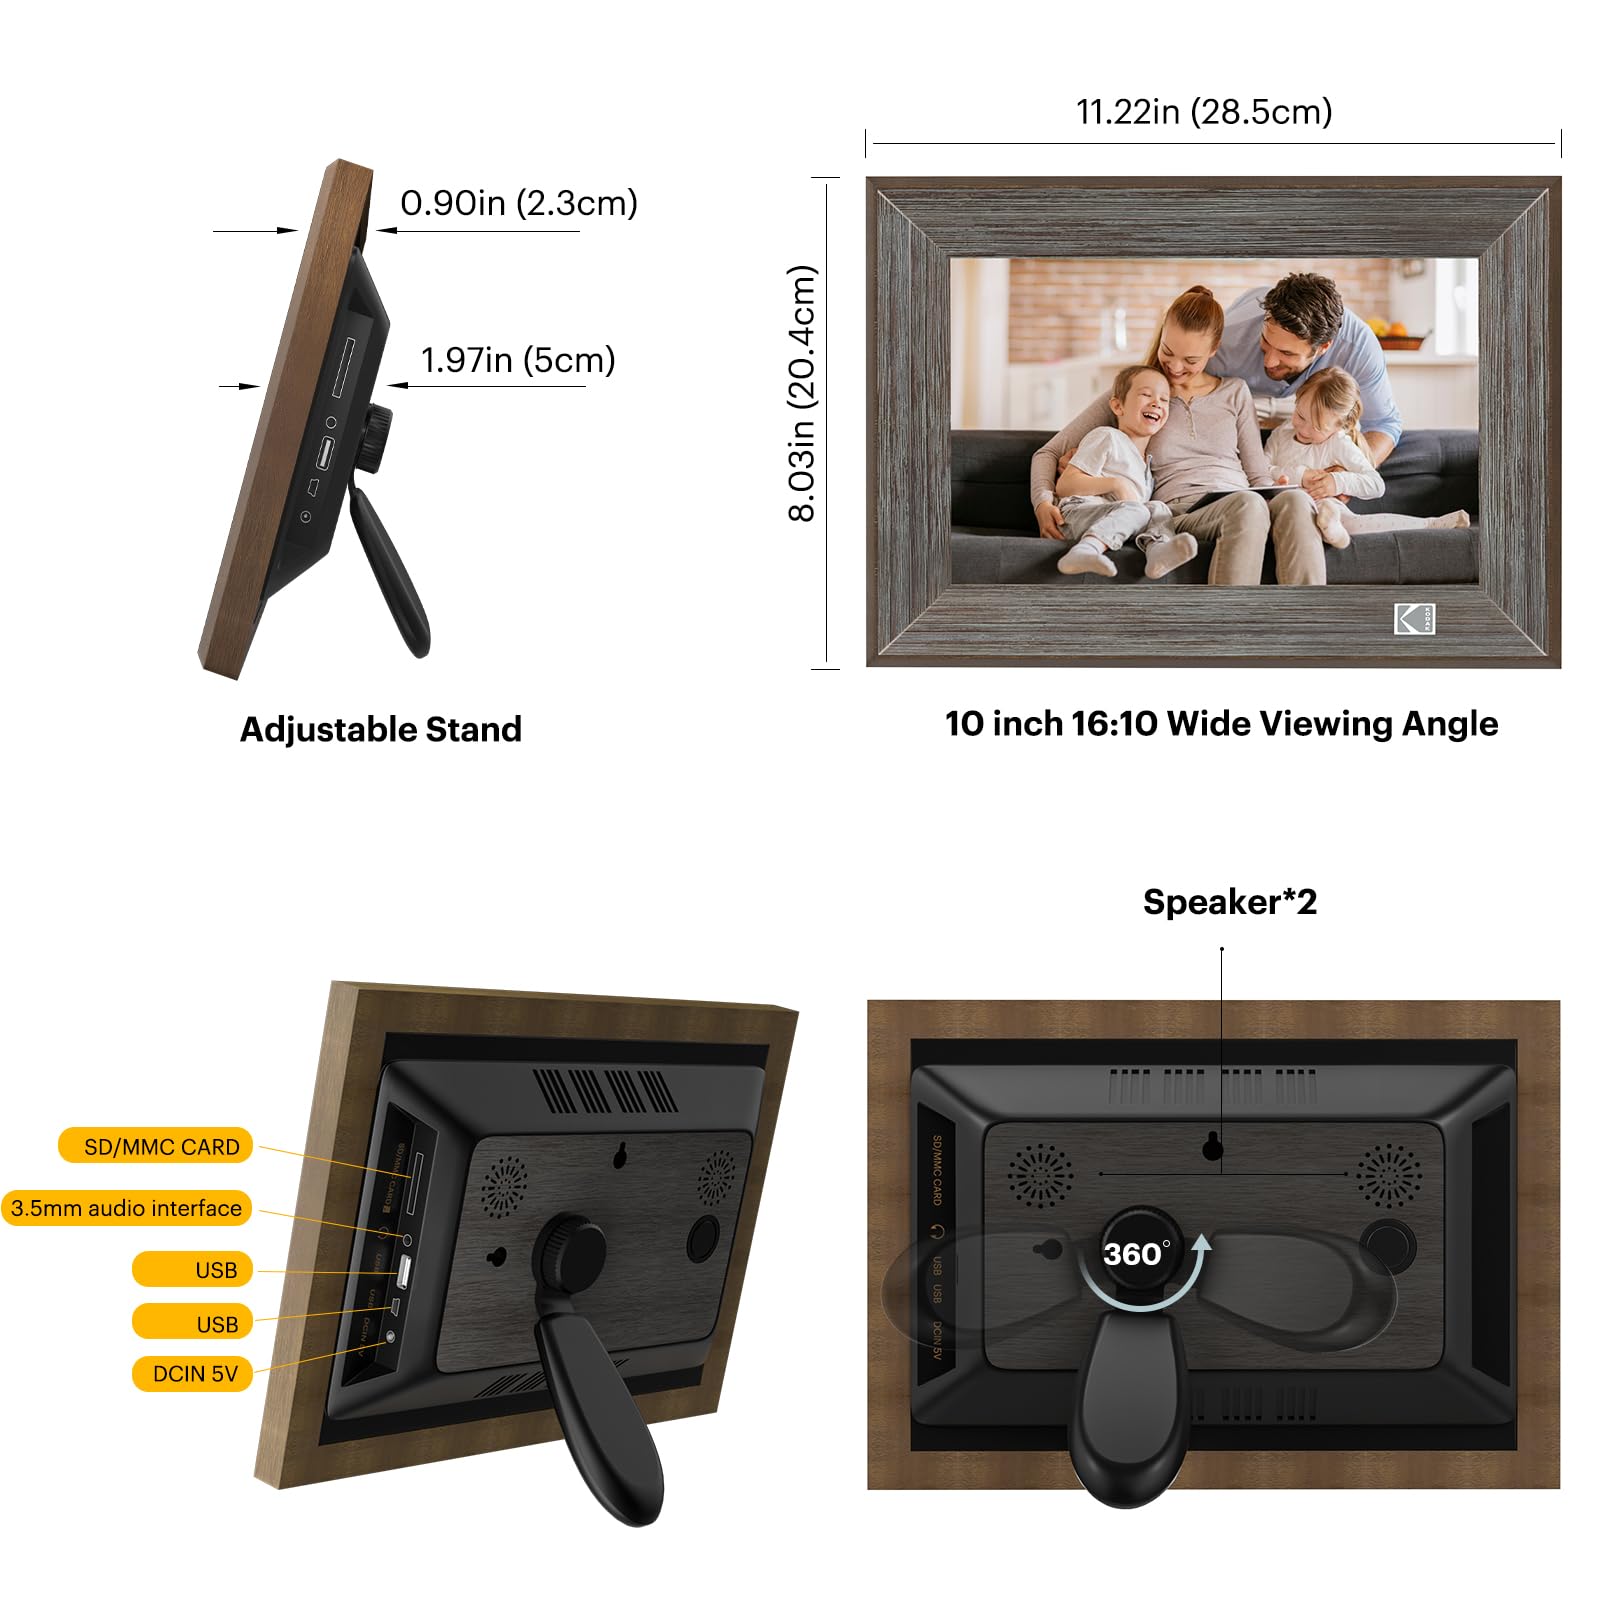 KODAK WiFi Digital Picture Frame, 10.1 Inch 1280 * 800 Resolution Touch Screen with 32GB Storage,Effortless to Set up,Share Video and Photos via E-Mail or App-Gift for Friends and Family (Grey Wood)